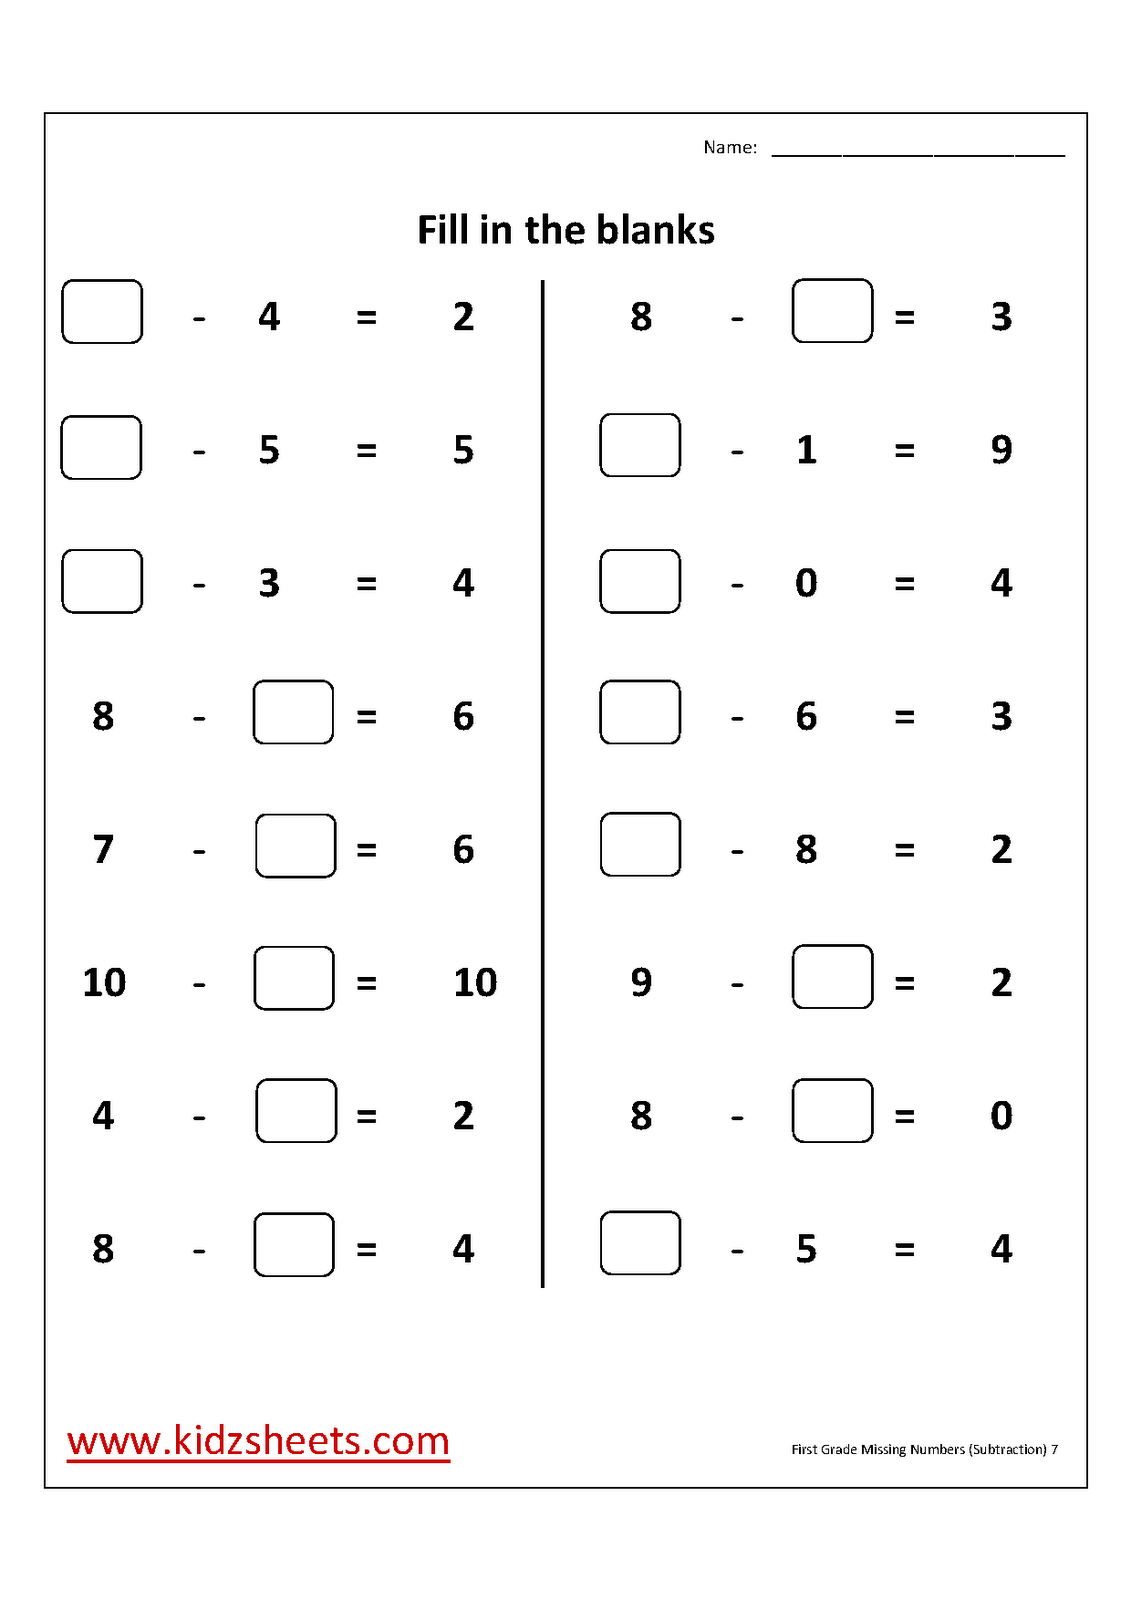 addition numbers grade missing number numbers worksheets Worksheets, Subtraction Missing Grade 2nd Missing